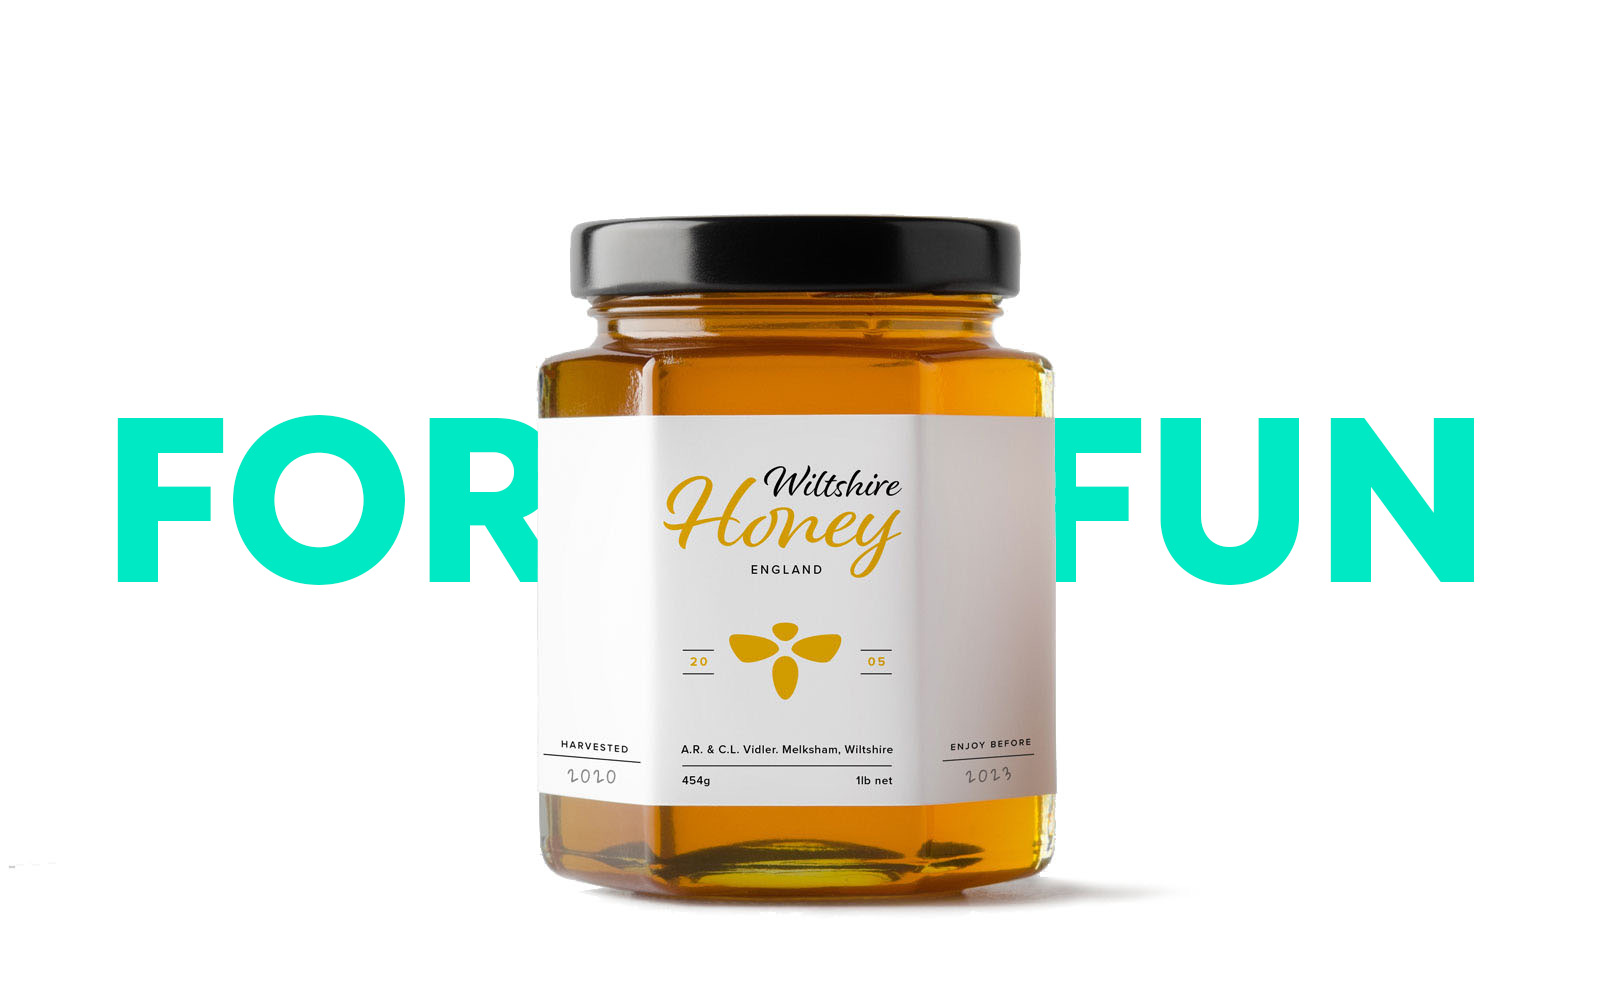 Redesign of Wiltshire Honey by Oliver Milburn